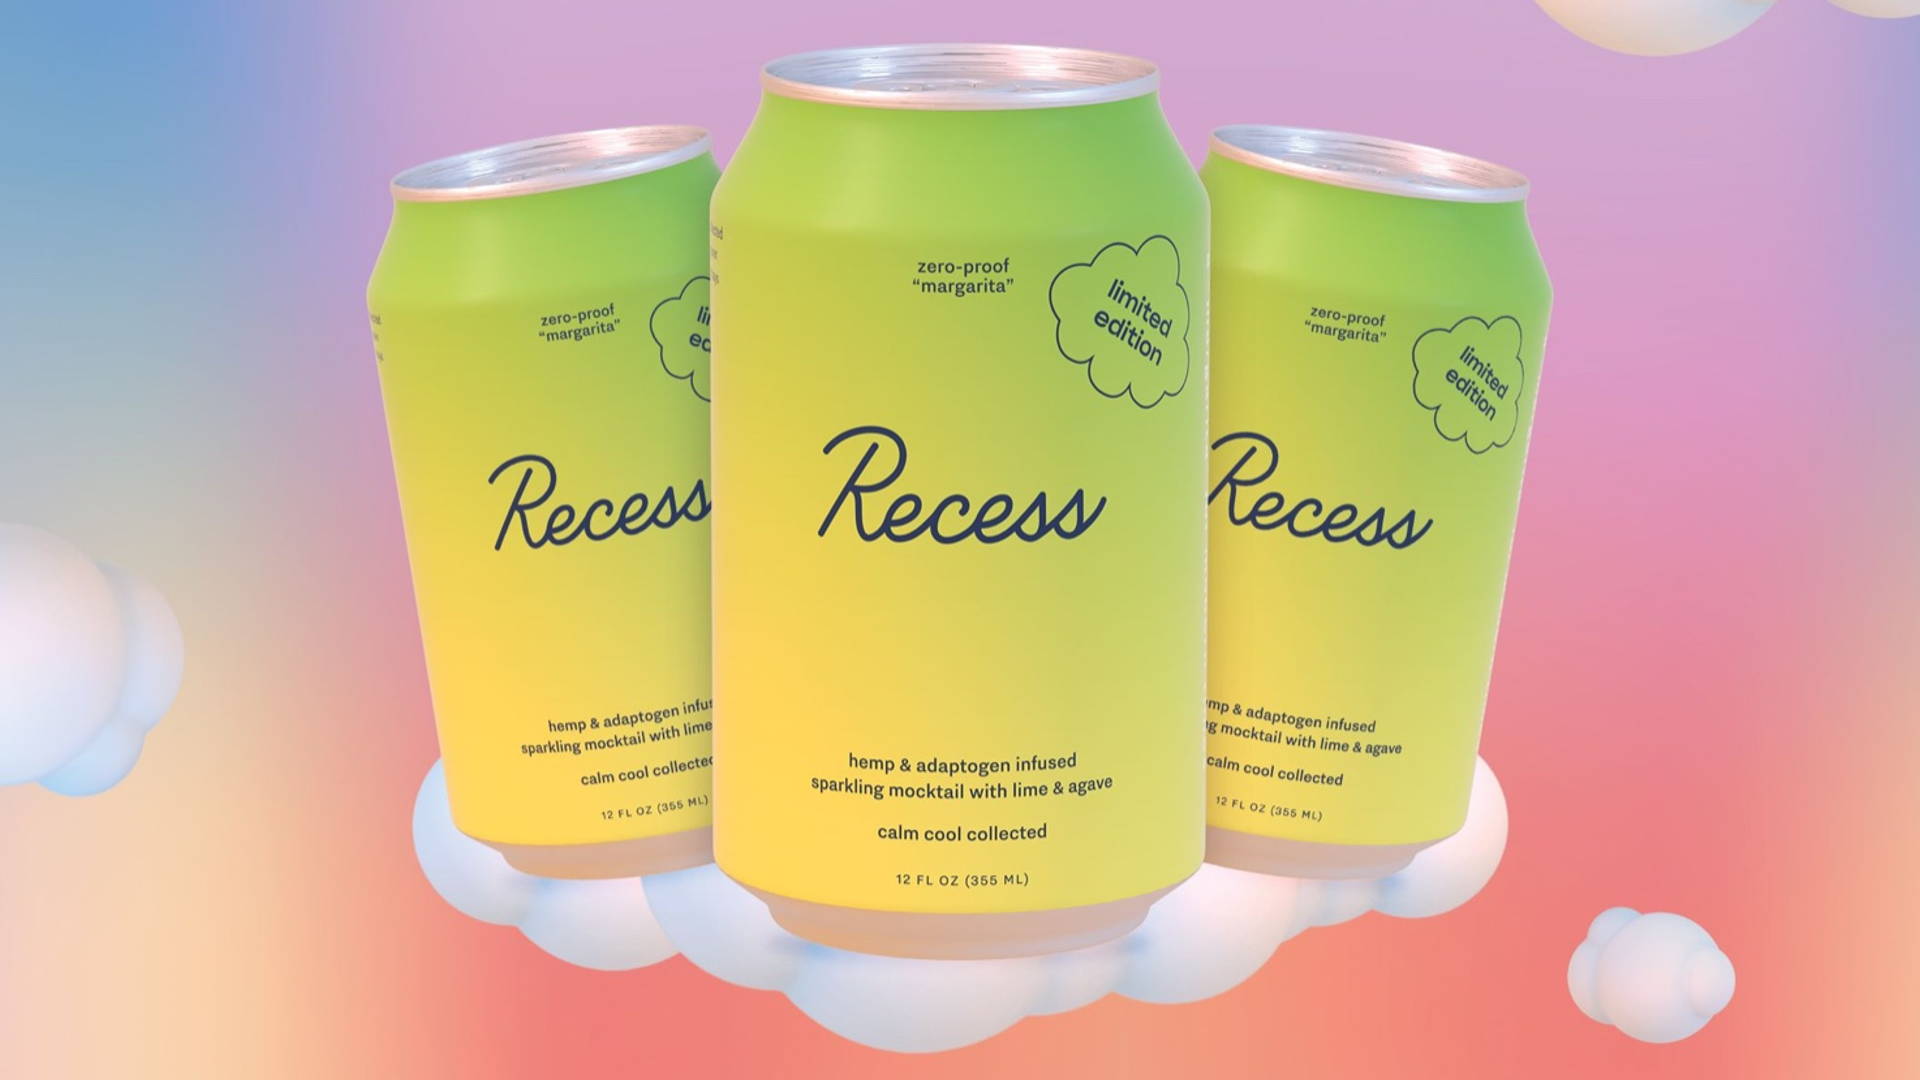 Featured image for Take That Much Needed Break With Recess' Limited-Edition Zero-Proof Margarita